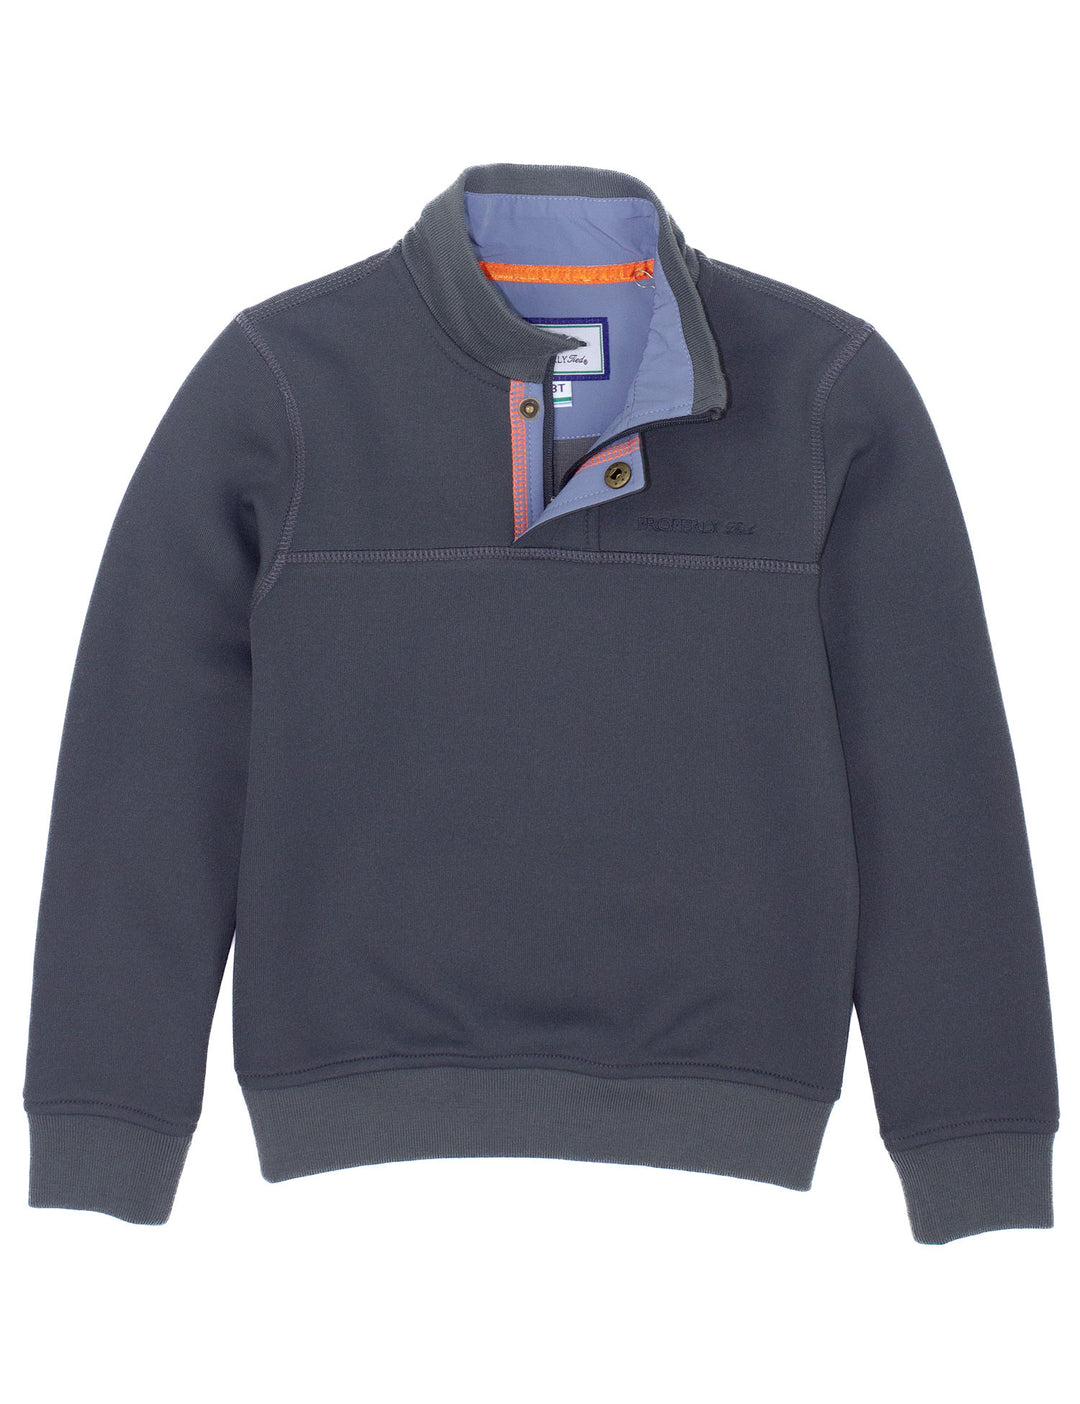 LD Kennedy Pullover - Charcoal